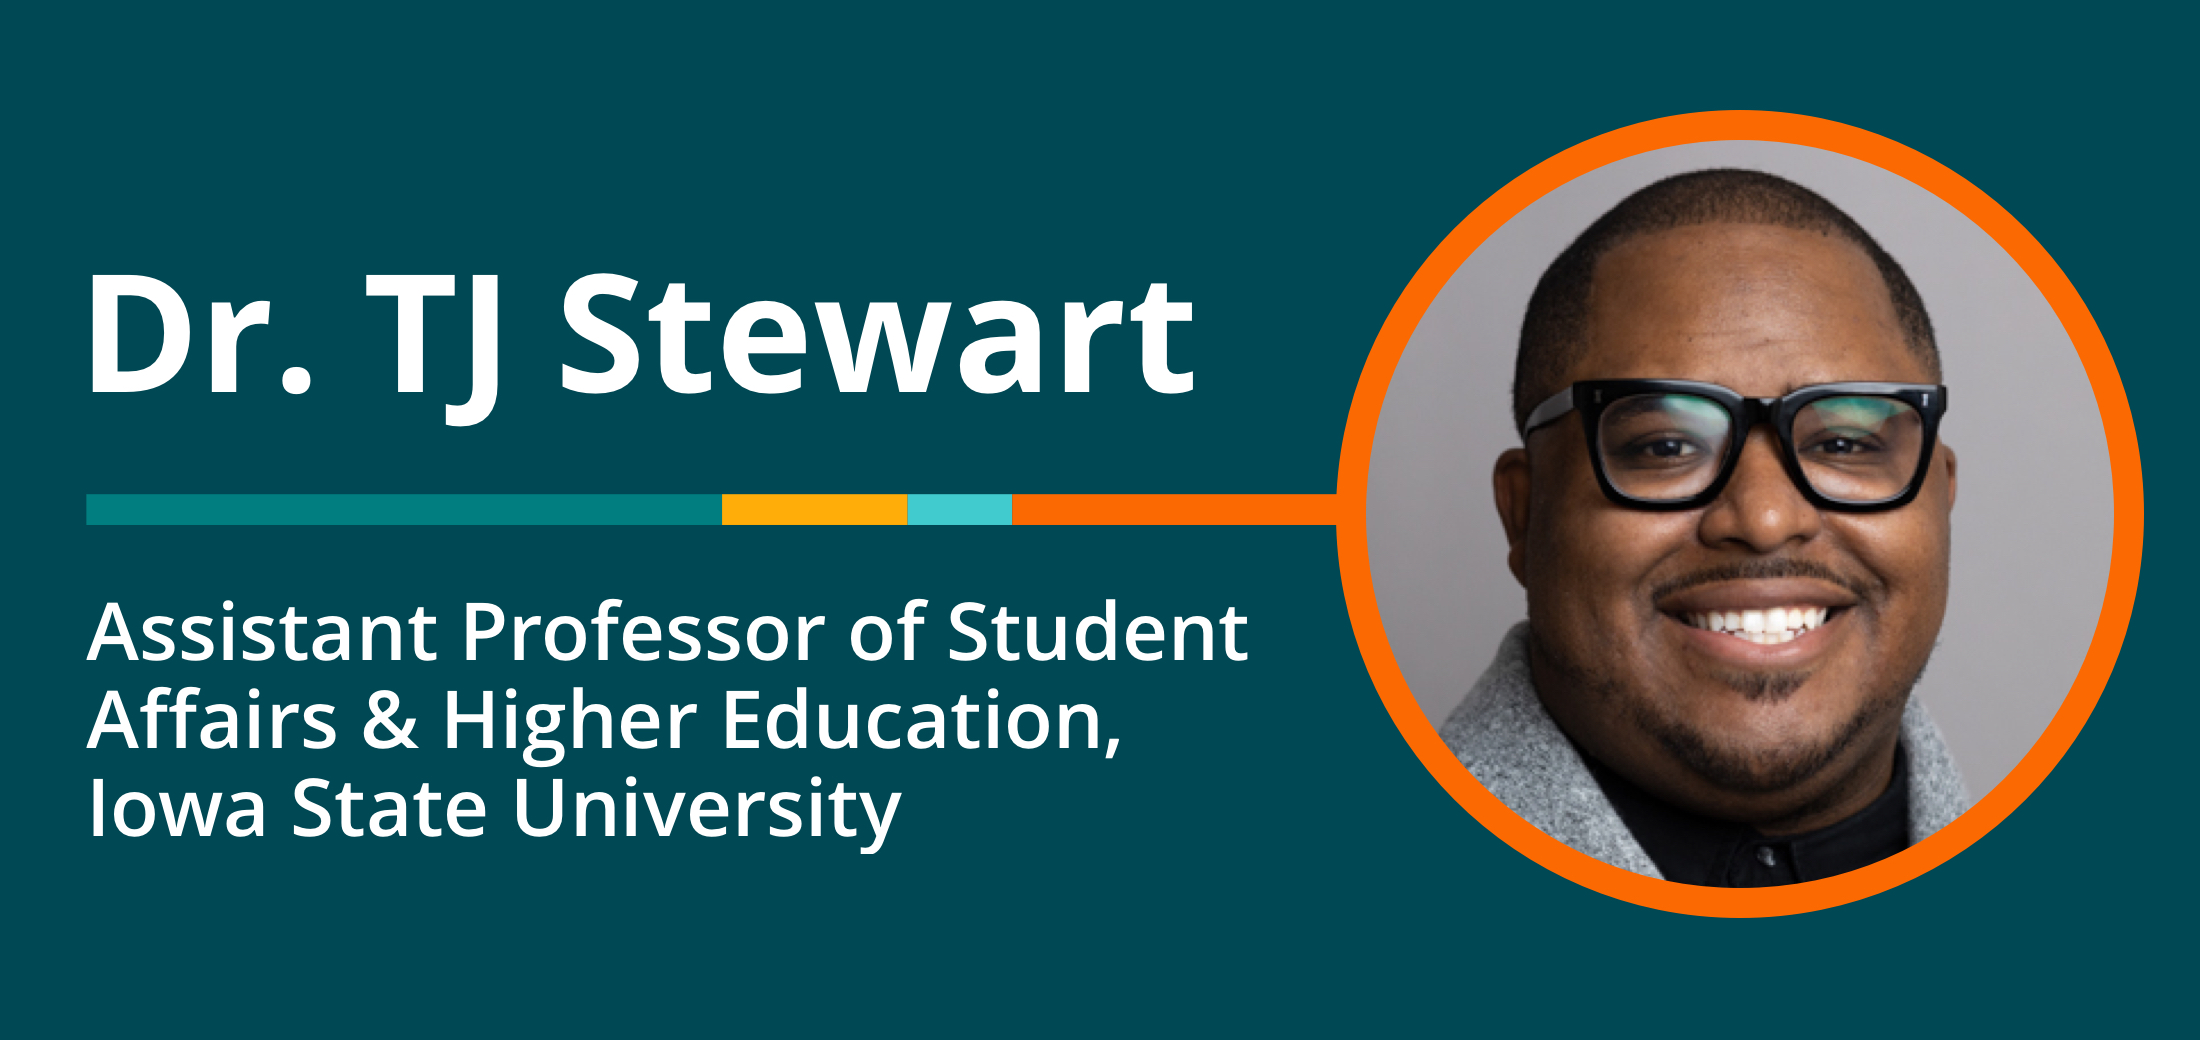 Dr. TJ Stewart, Assistant Professor of Student Affairs and Higher Education, Iowa State University